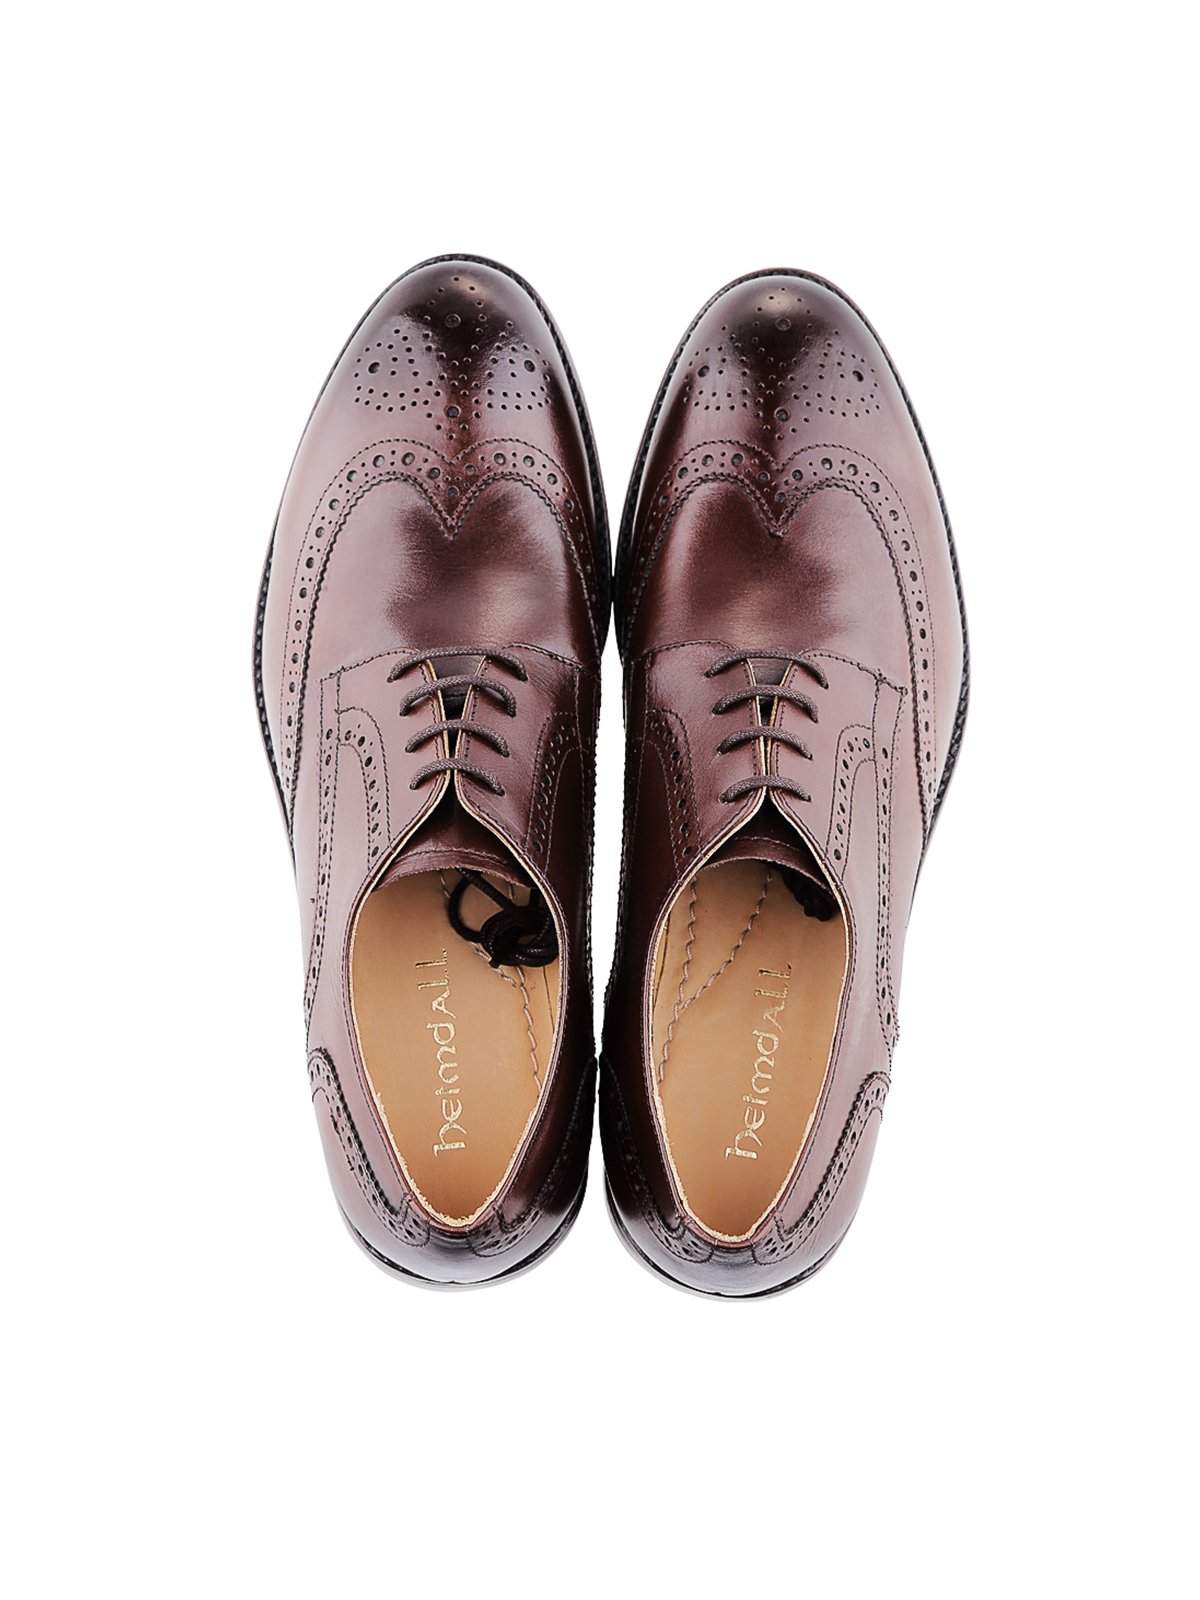 Heimdall Loki Wingtip Derby Brown - MORE by Morello Indonesia